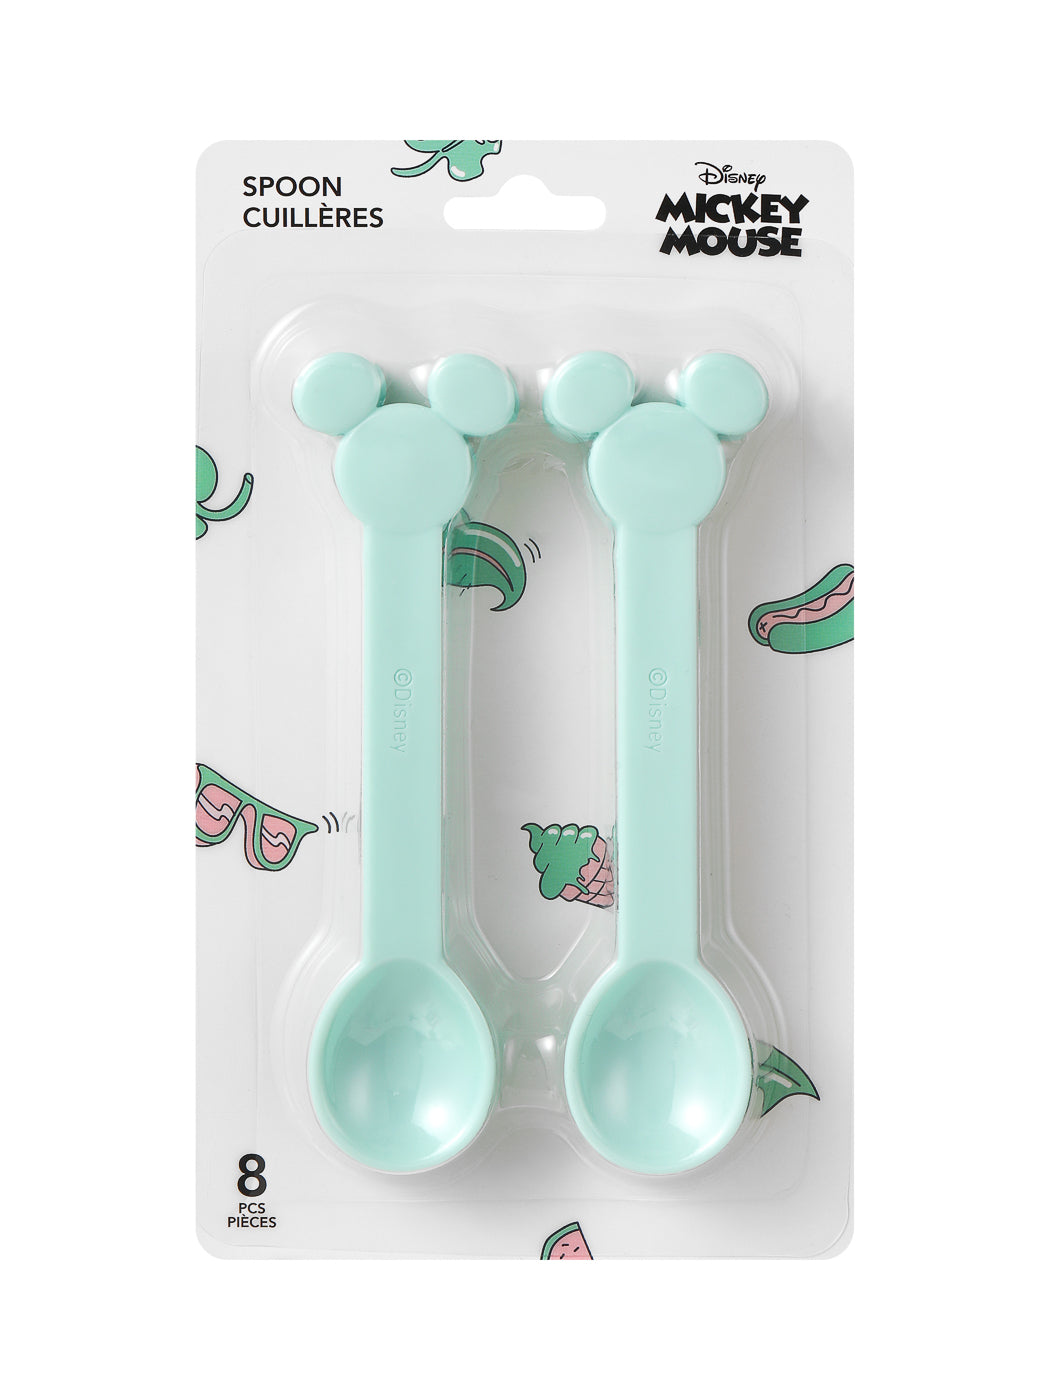 MINISO MICKEY MOUSE COLLECTION 2.0 SPOON 8PCS(MICKEY MOUSE) 2010538210107 CUTLERY SET-5